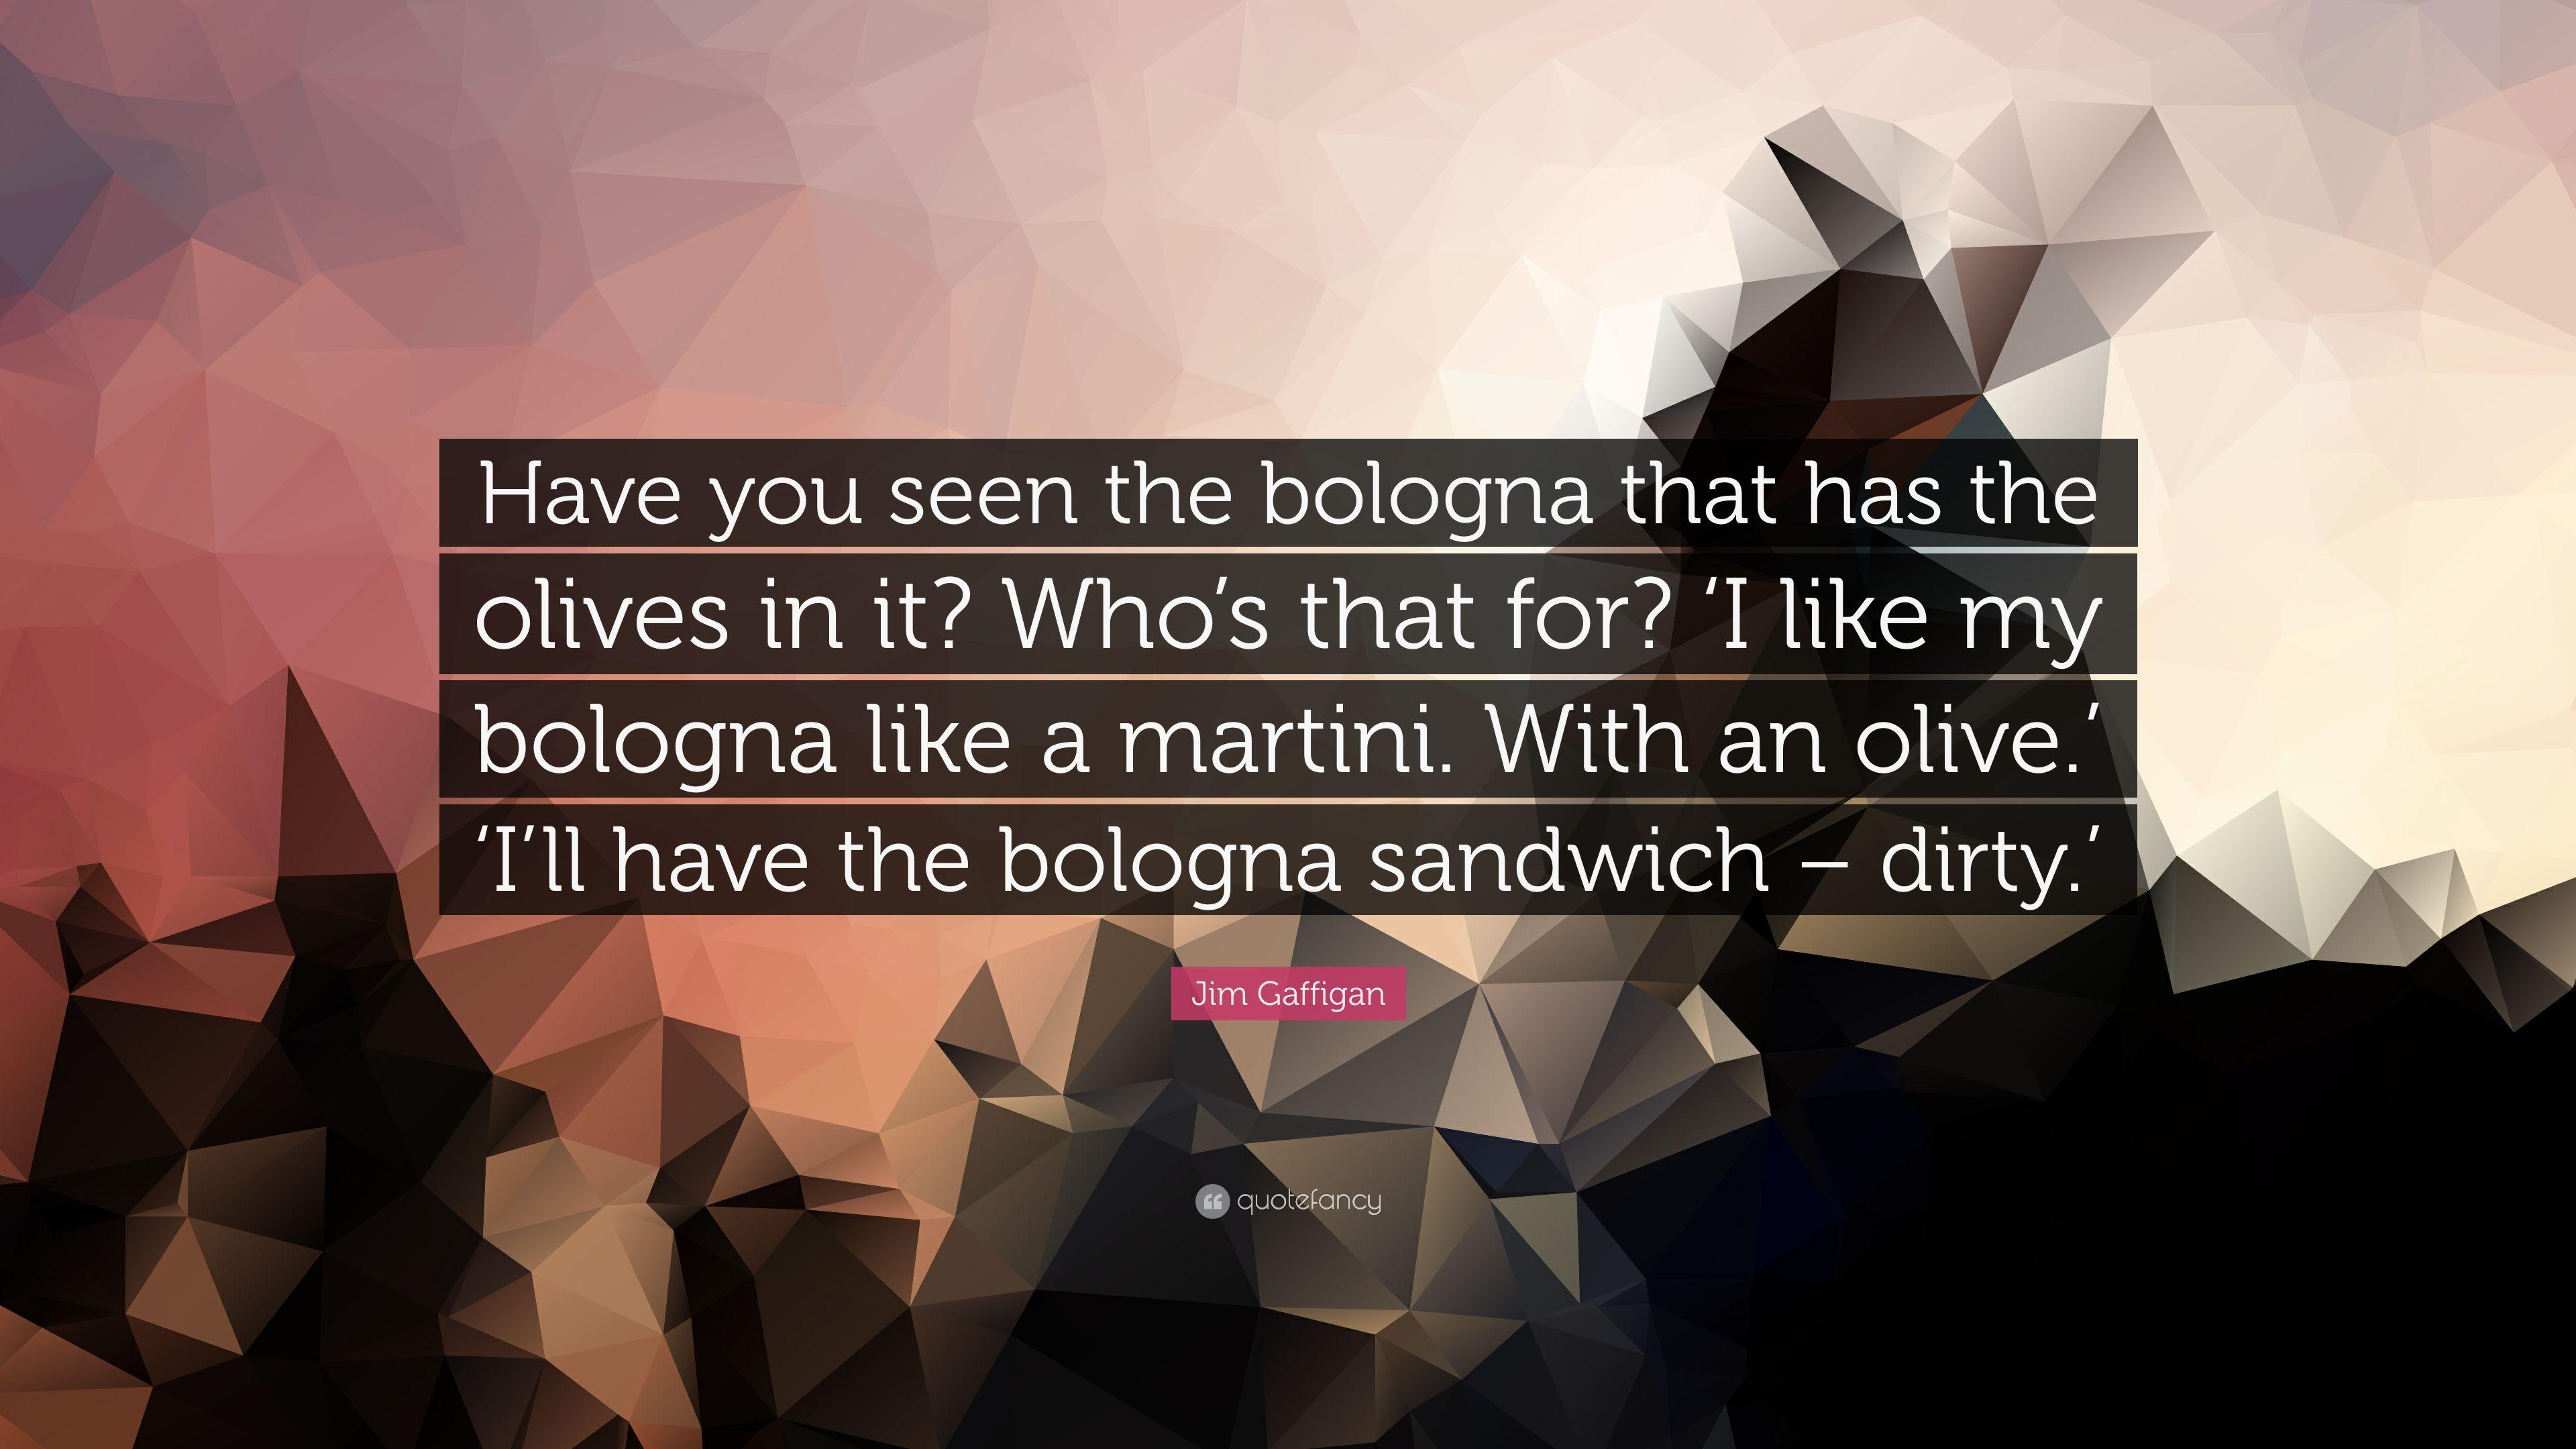 Jim Gaffigan Quote: “Have you seen the bologna that has the olives